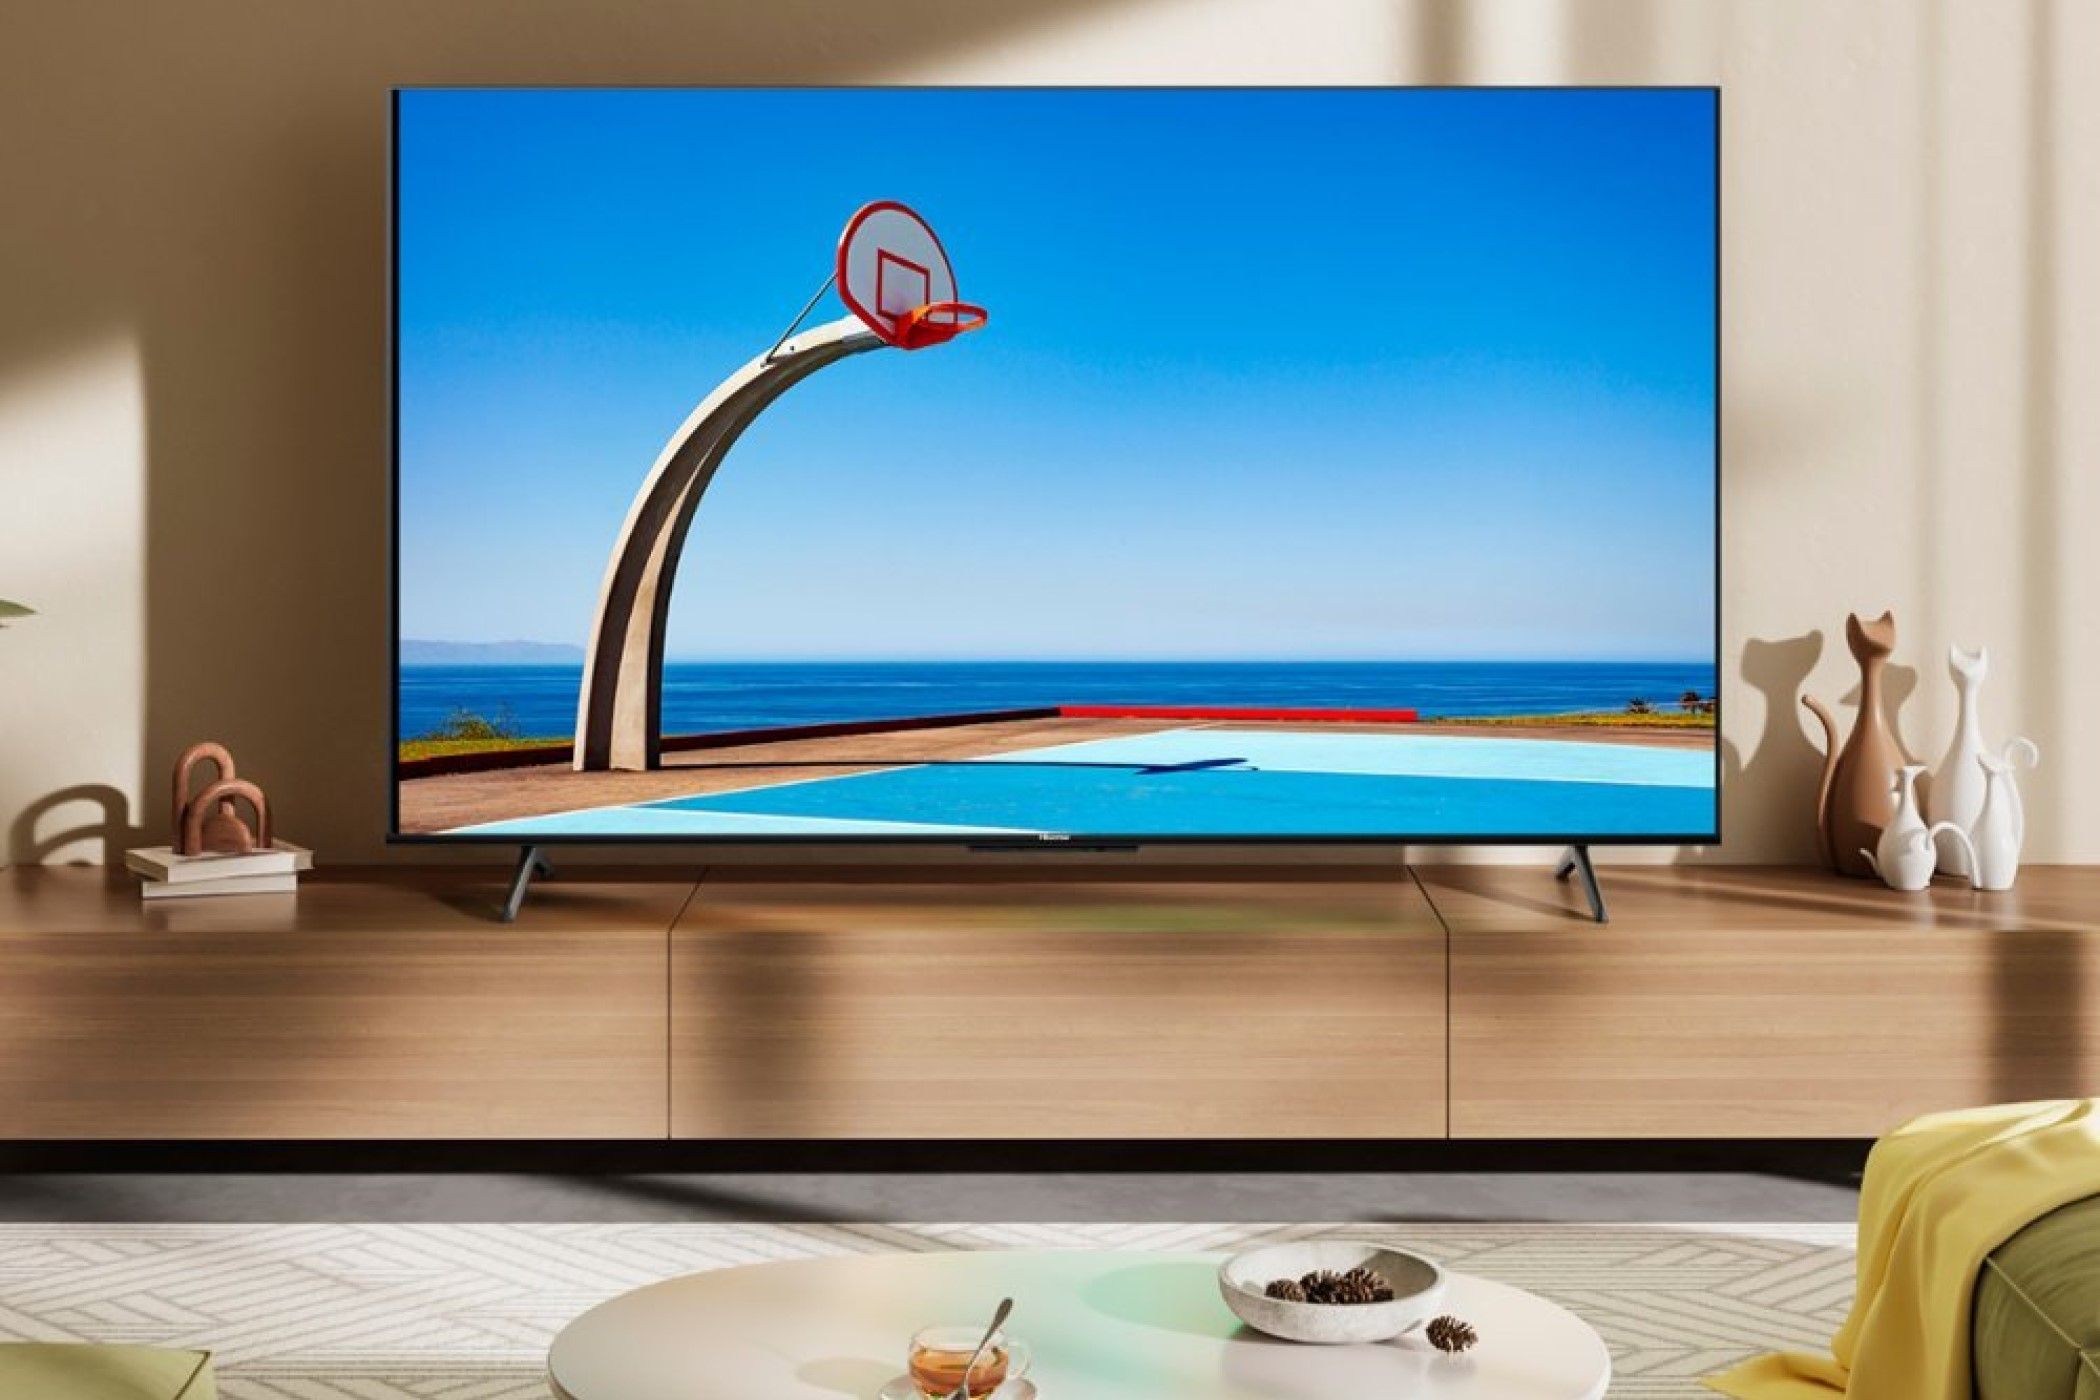 A Hisense U6N in a room on top of a TV stand. 